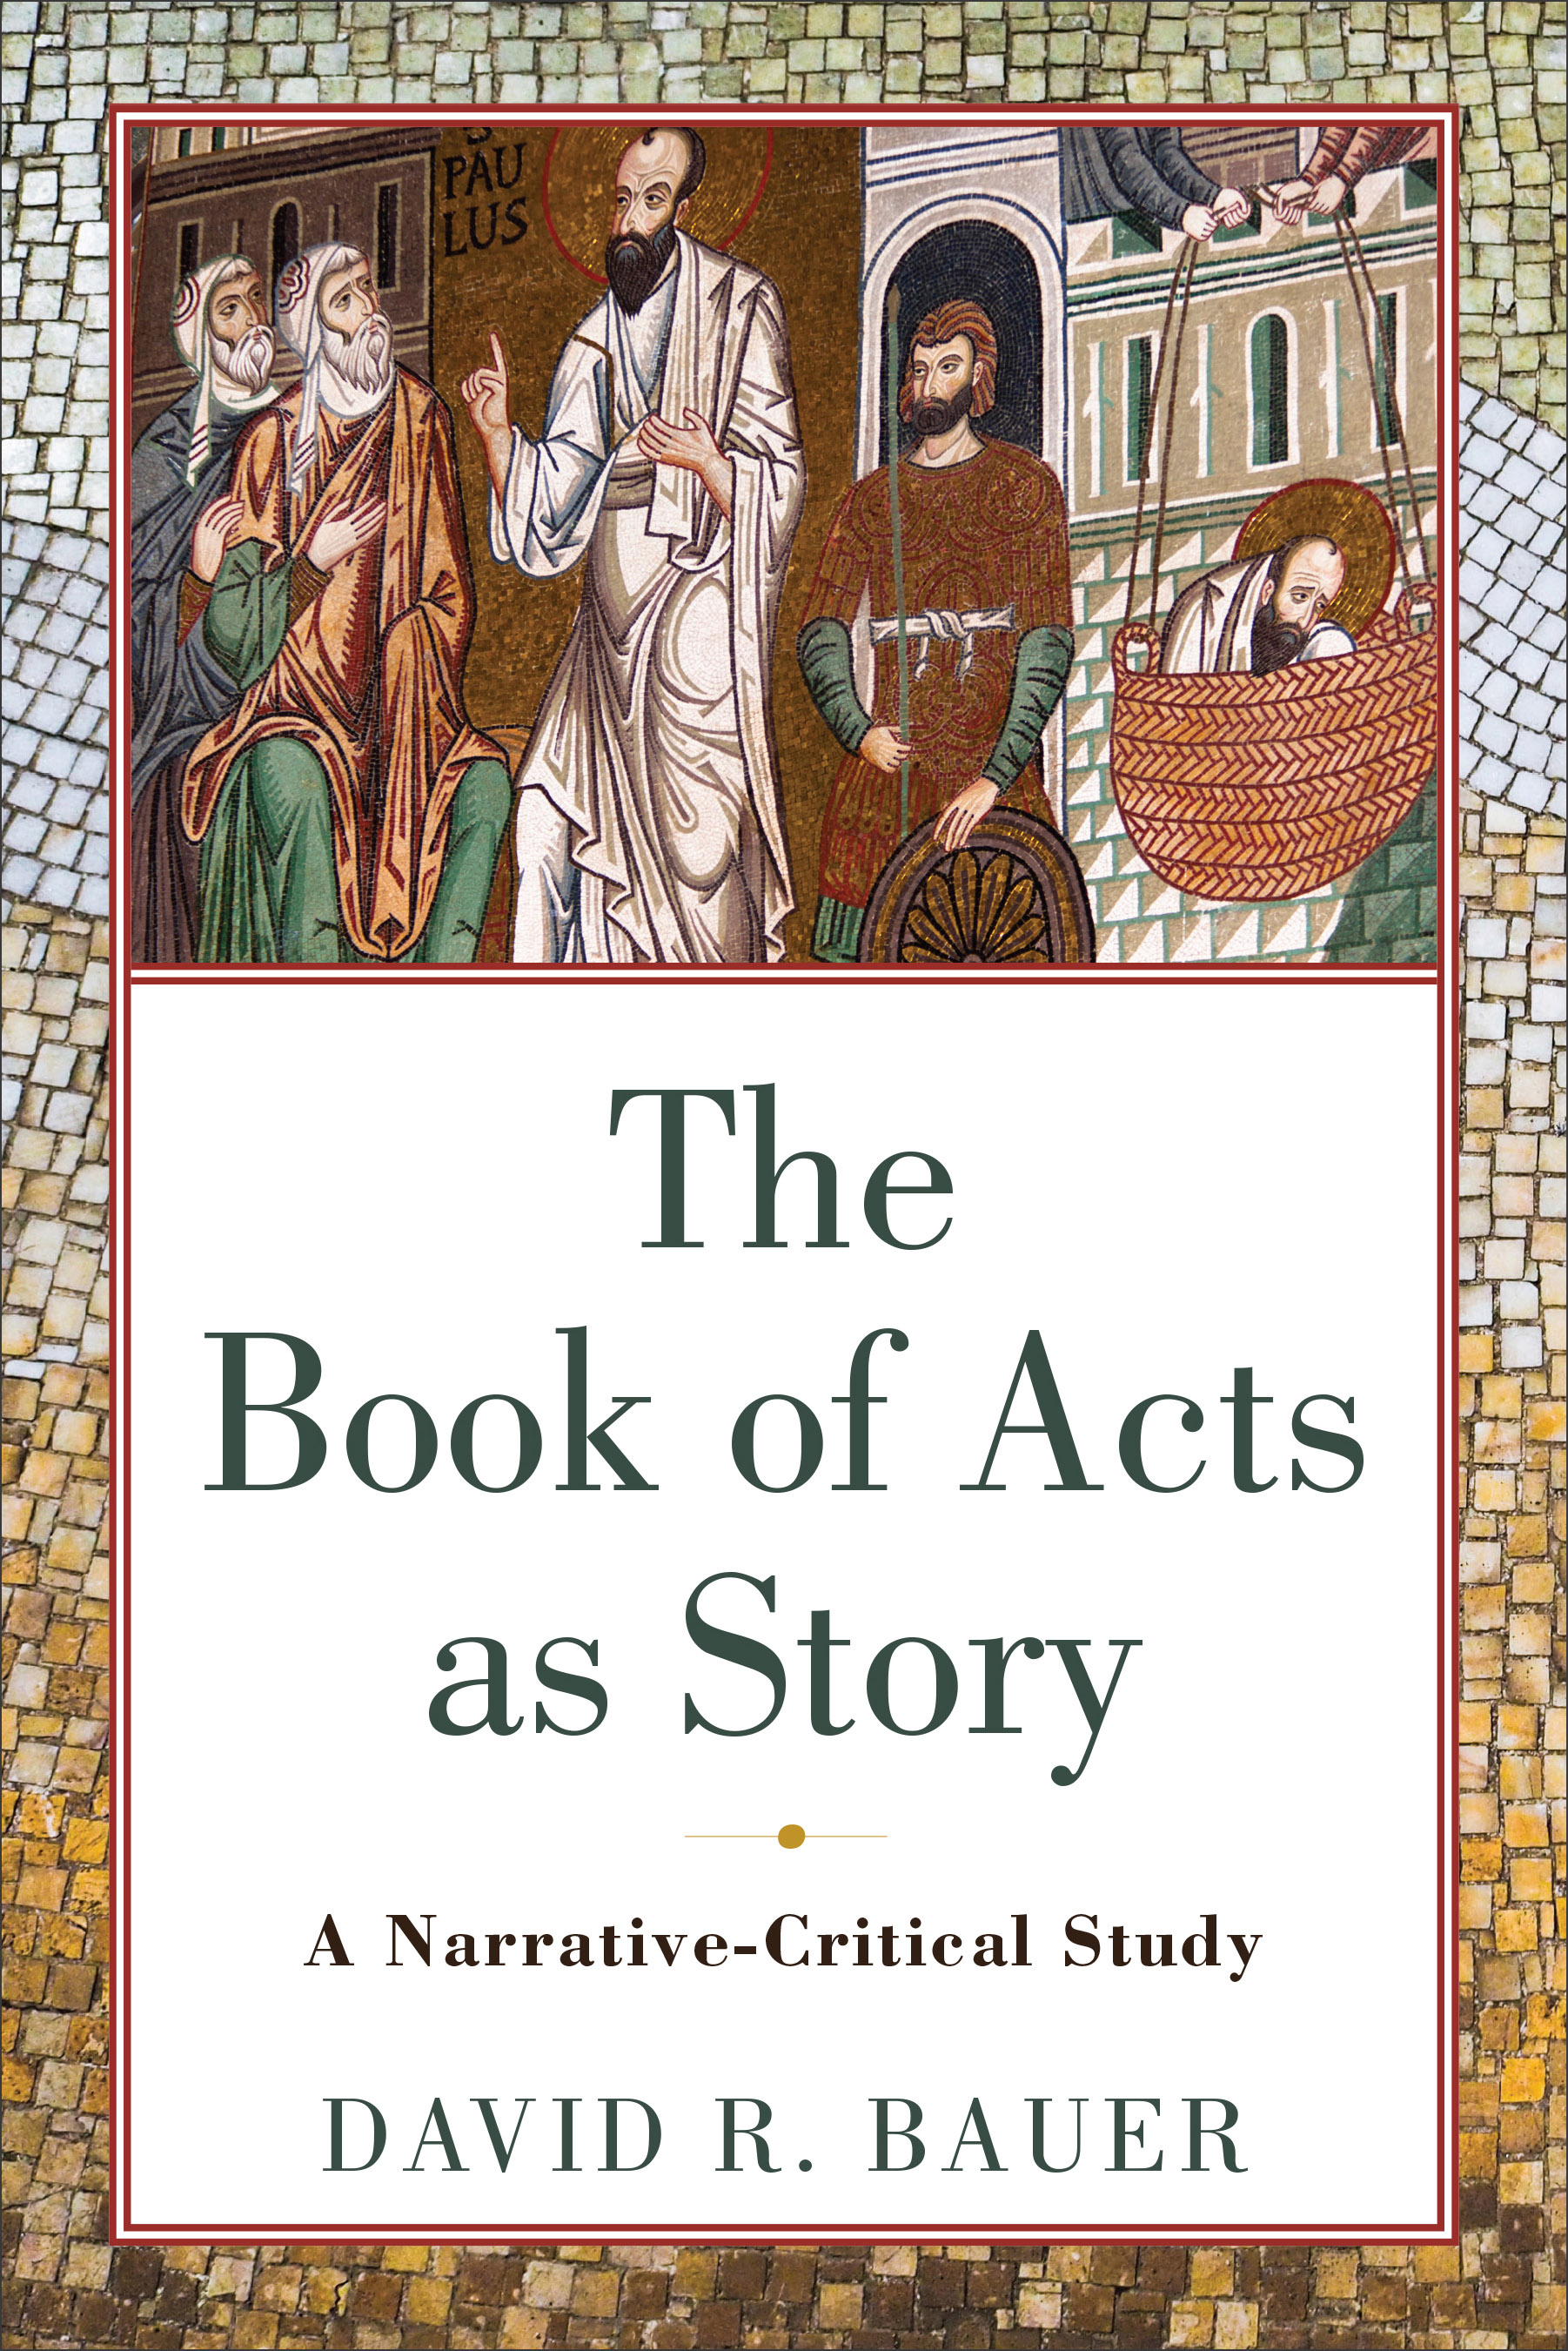 what stories are in the book of acts